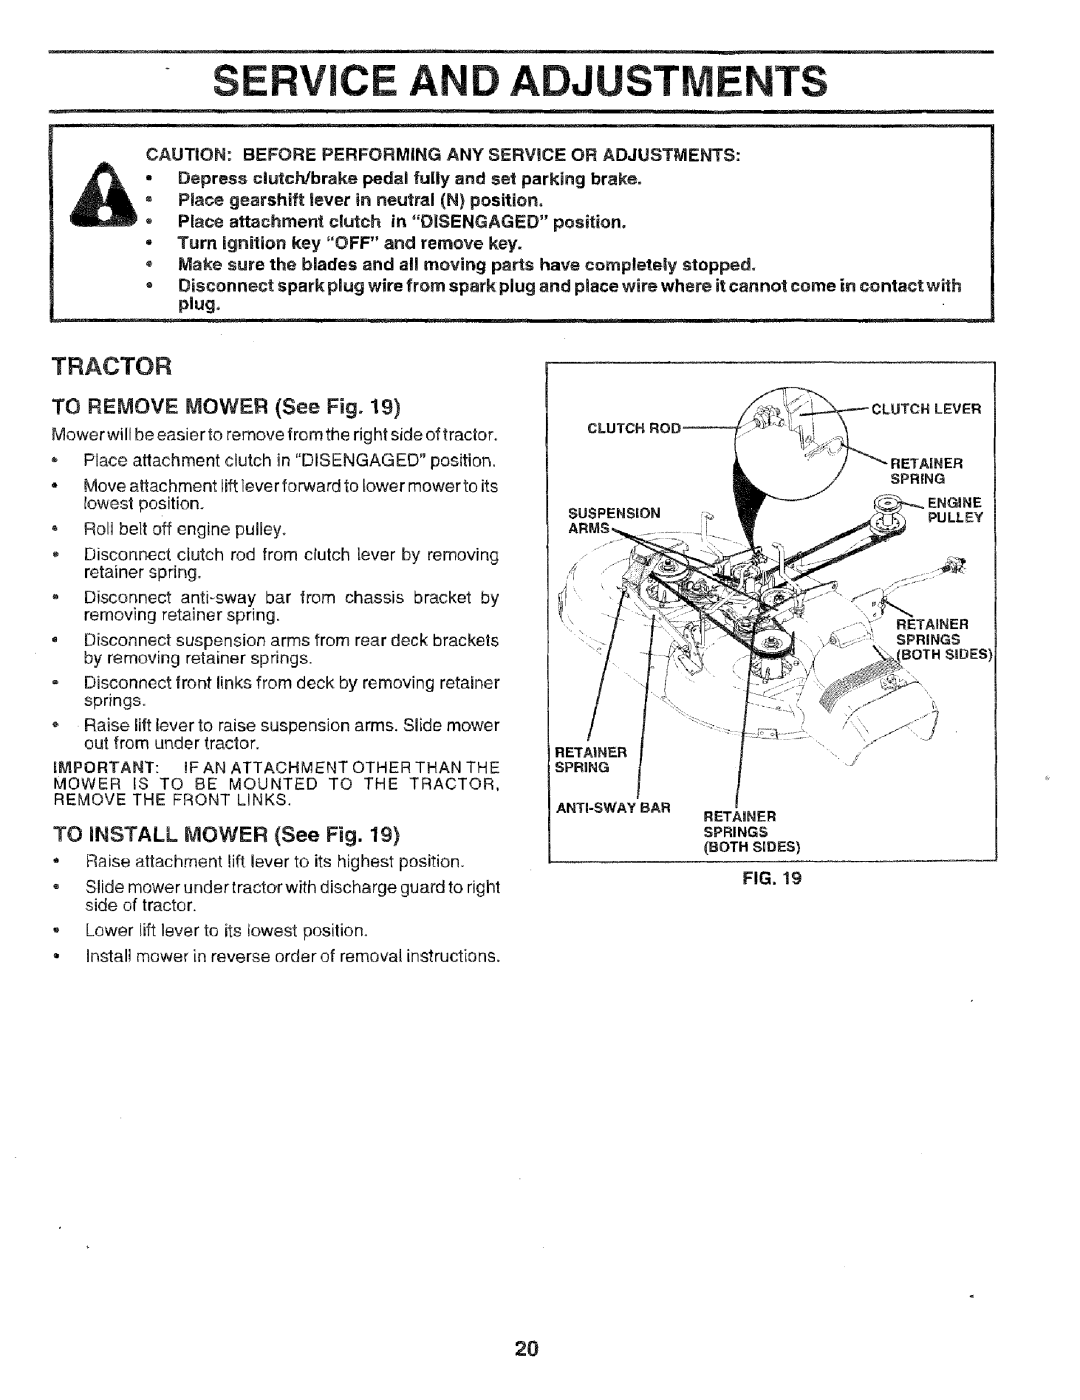 Craftsman 917.256544 owner manual Service Adjustme, TO REMOVE MOWER See Fig, TO iNSTALL MOWER See Fig, Tractor 